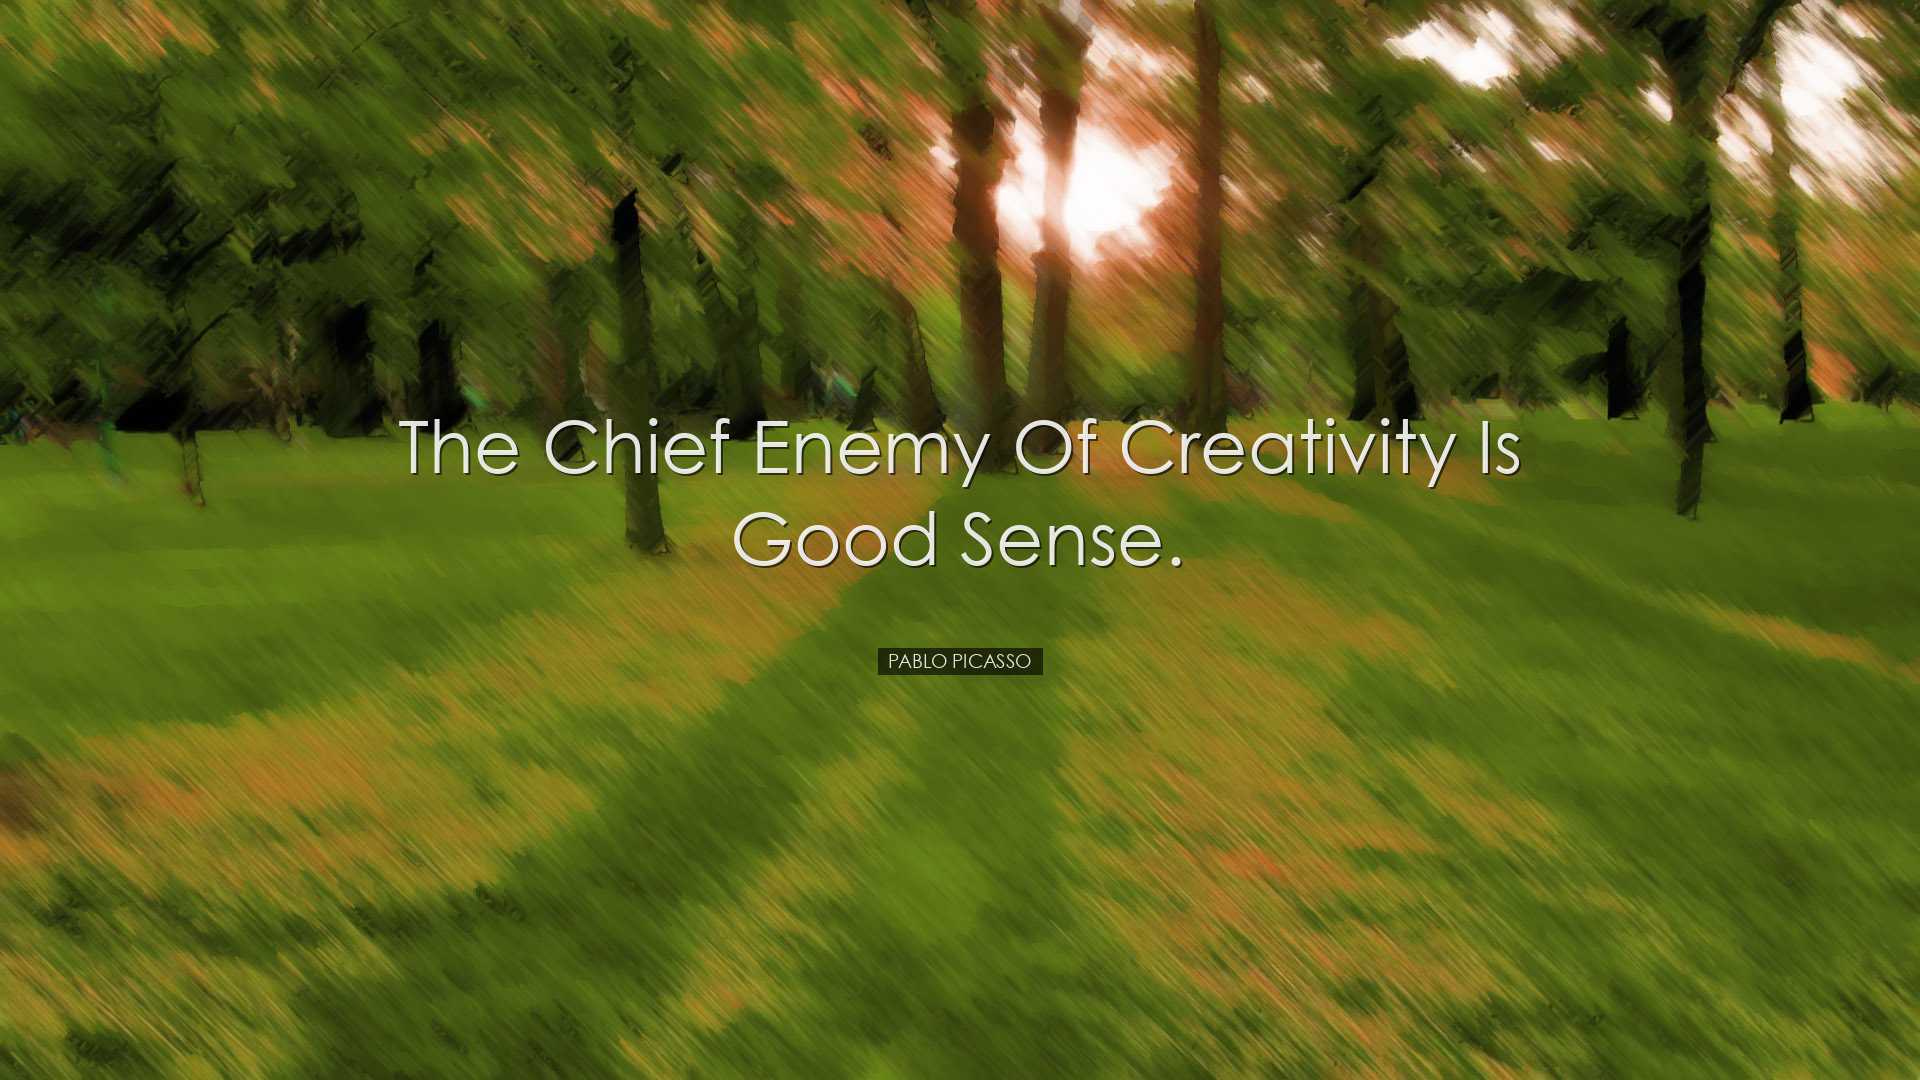 The chief enemy of creativity is good sense. - Pablo Picasso